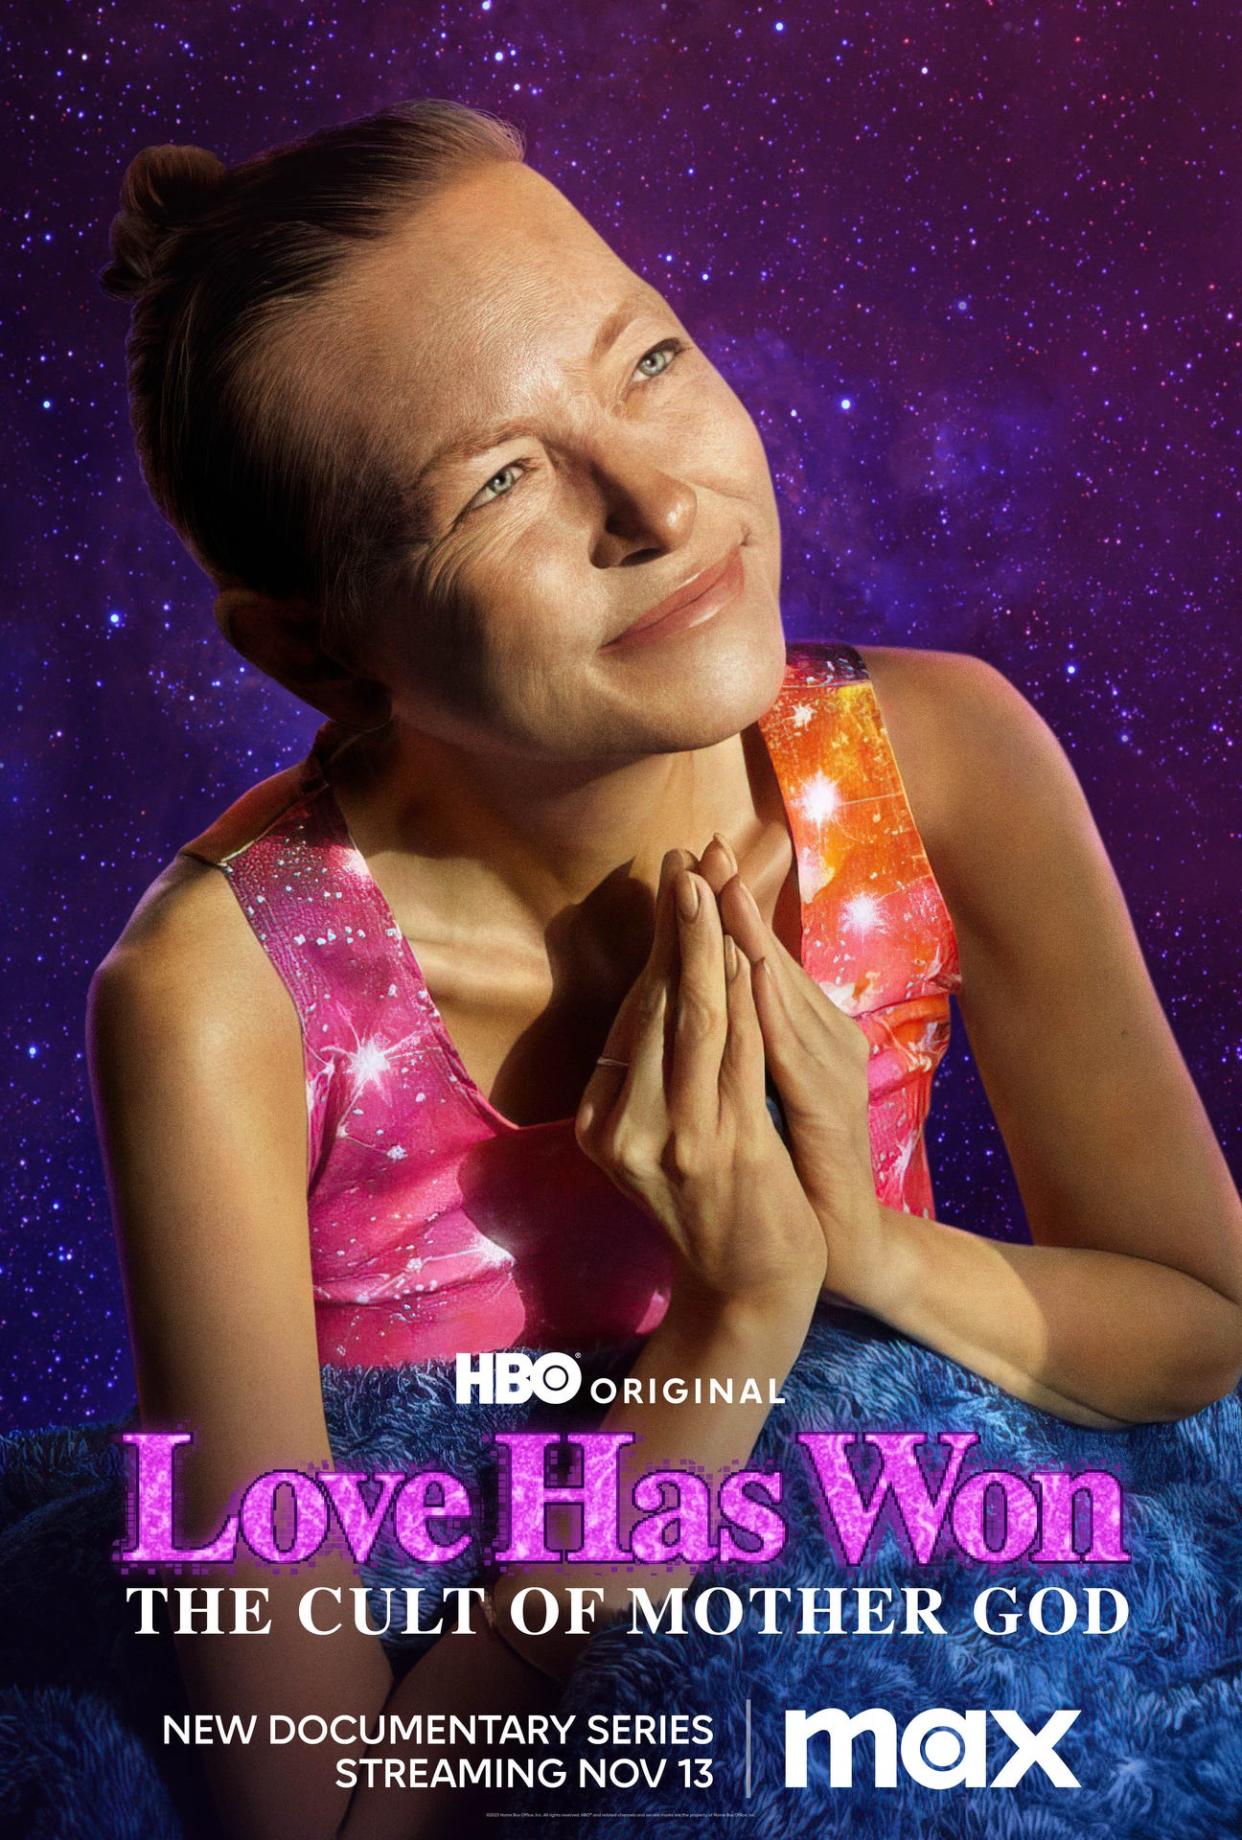 The Love Has Won documentary brought in a huge amount of curious viewers shortly after release.